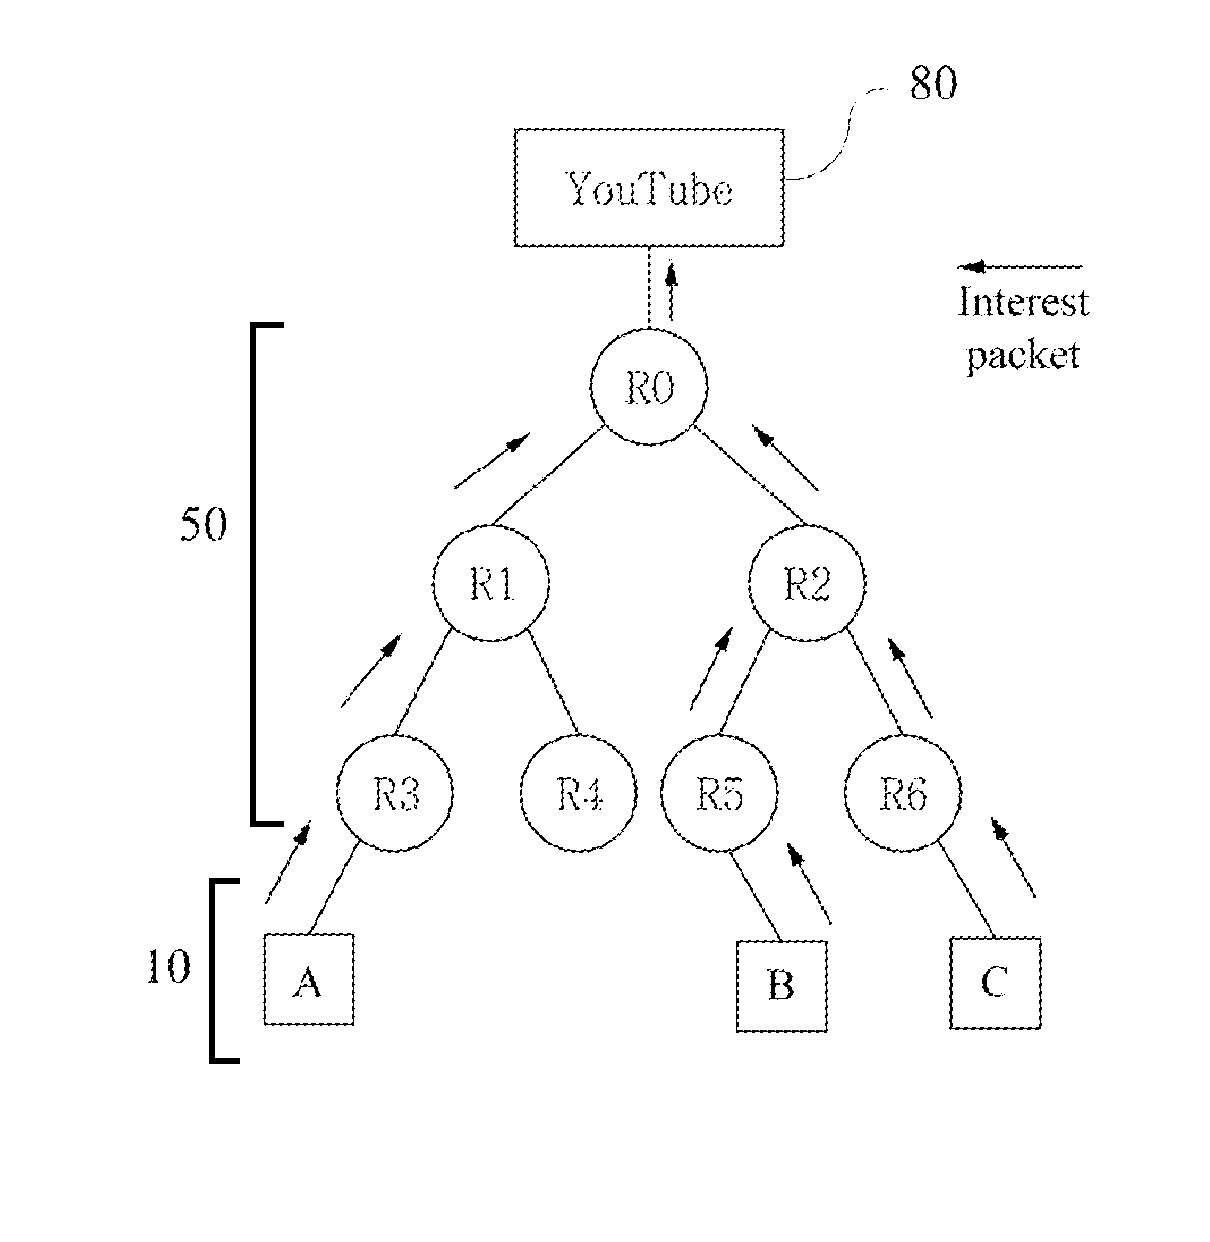 Content centric networking system providing differentiated service and method of controlling data traffic in content centric networking providing differentiated service